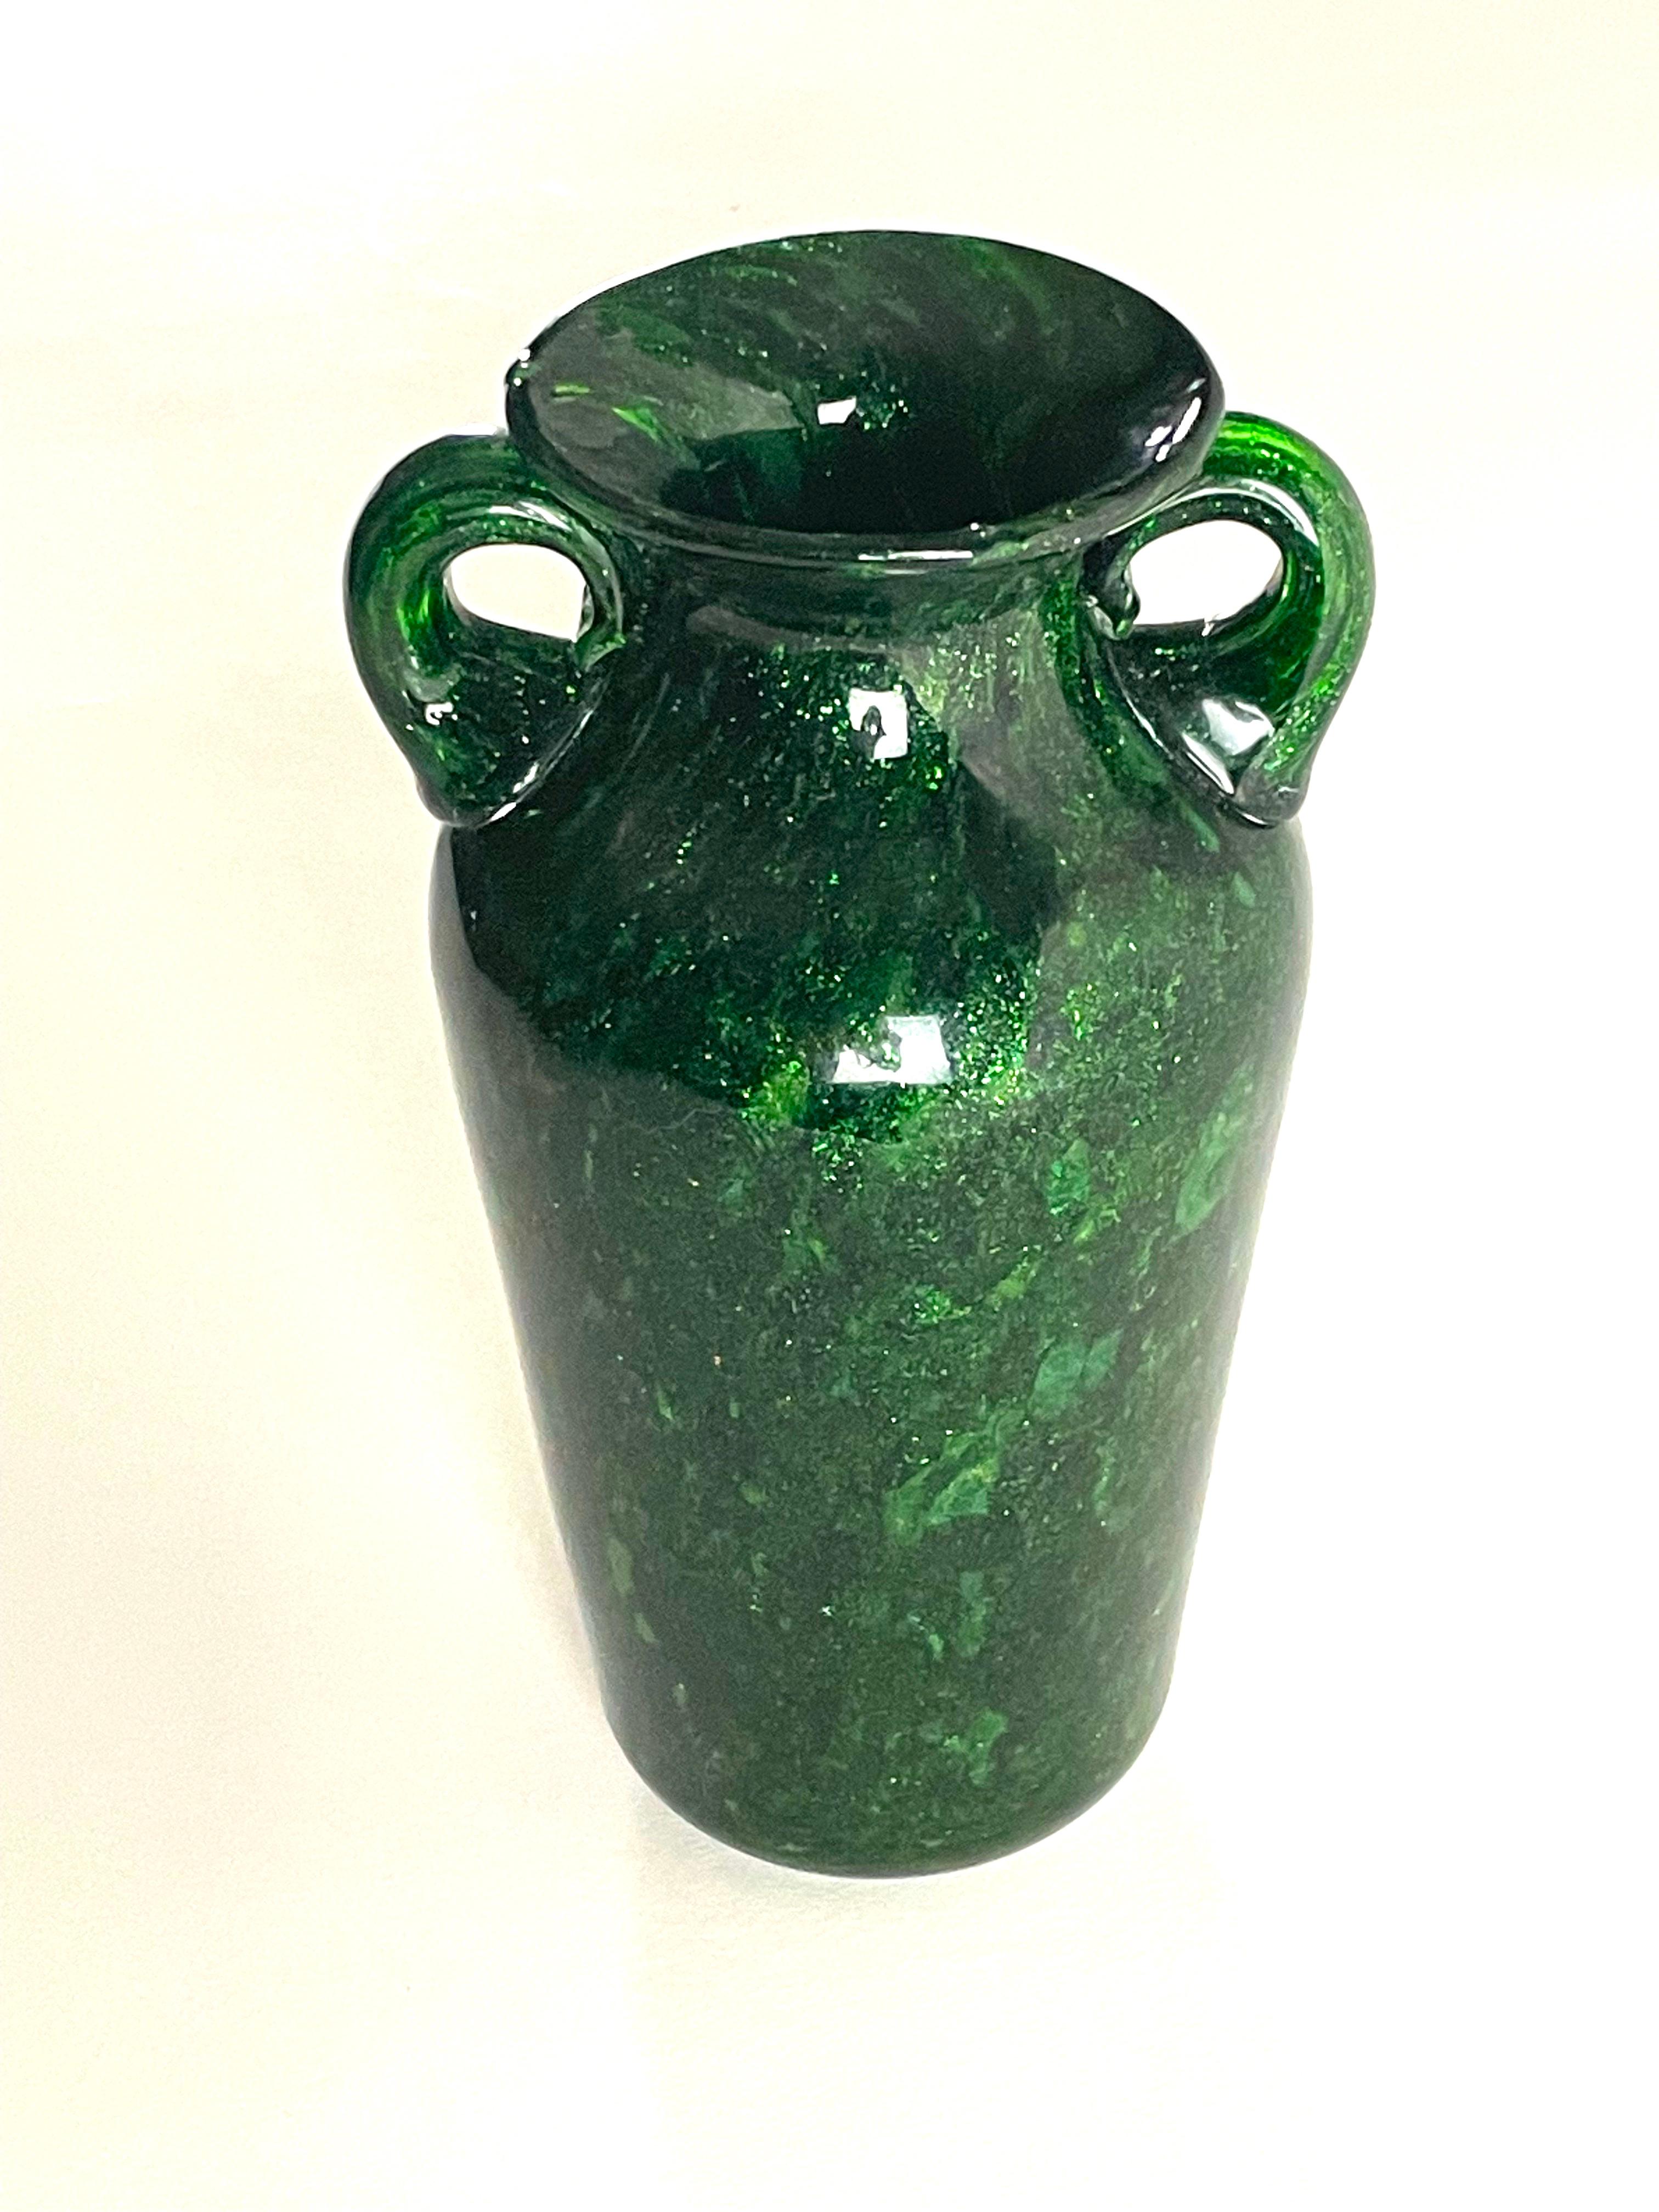 Malachite, an extraordinary creation by Fratelli Toso that pays homage to the iconic Murano glass style. Recalling a typical shape and style, immediately recalling Murano glass making. Its intense green hue radiates opulence and grace, akin to